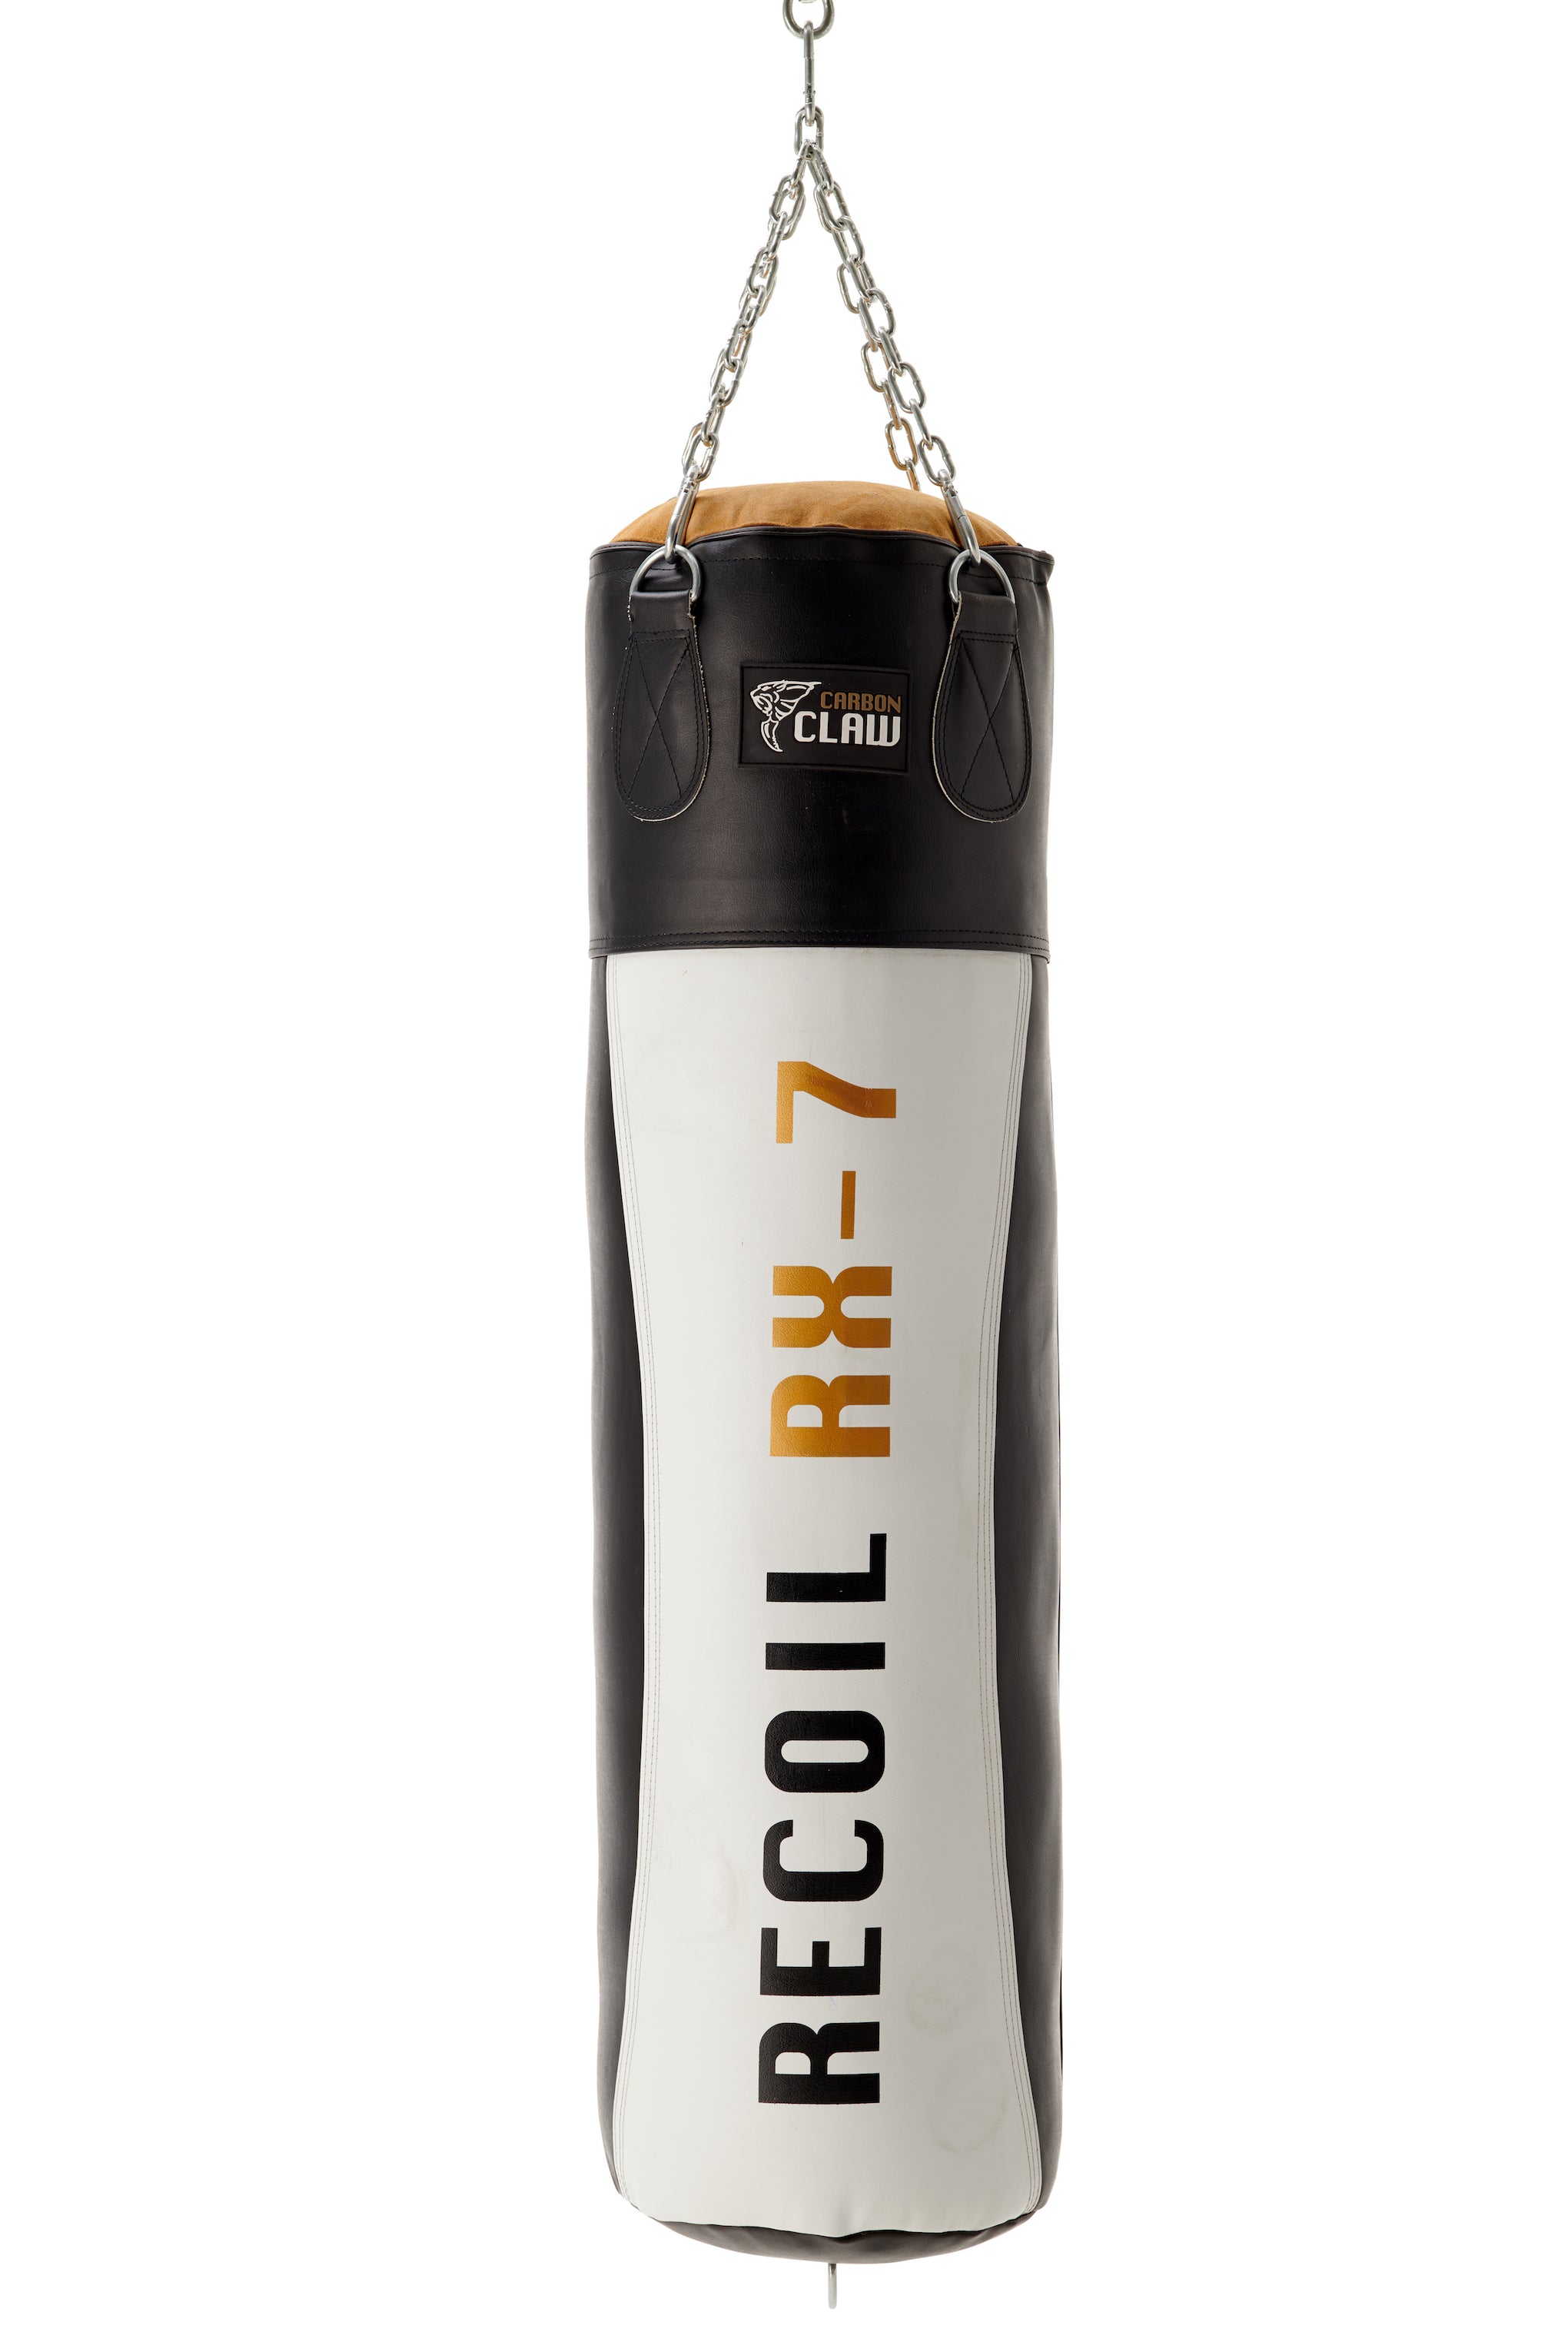 Carbon Claw Rx-7 Recoil Punchbag 4ft